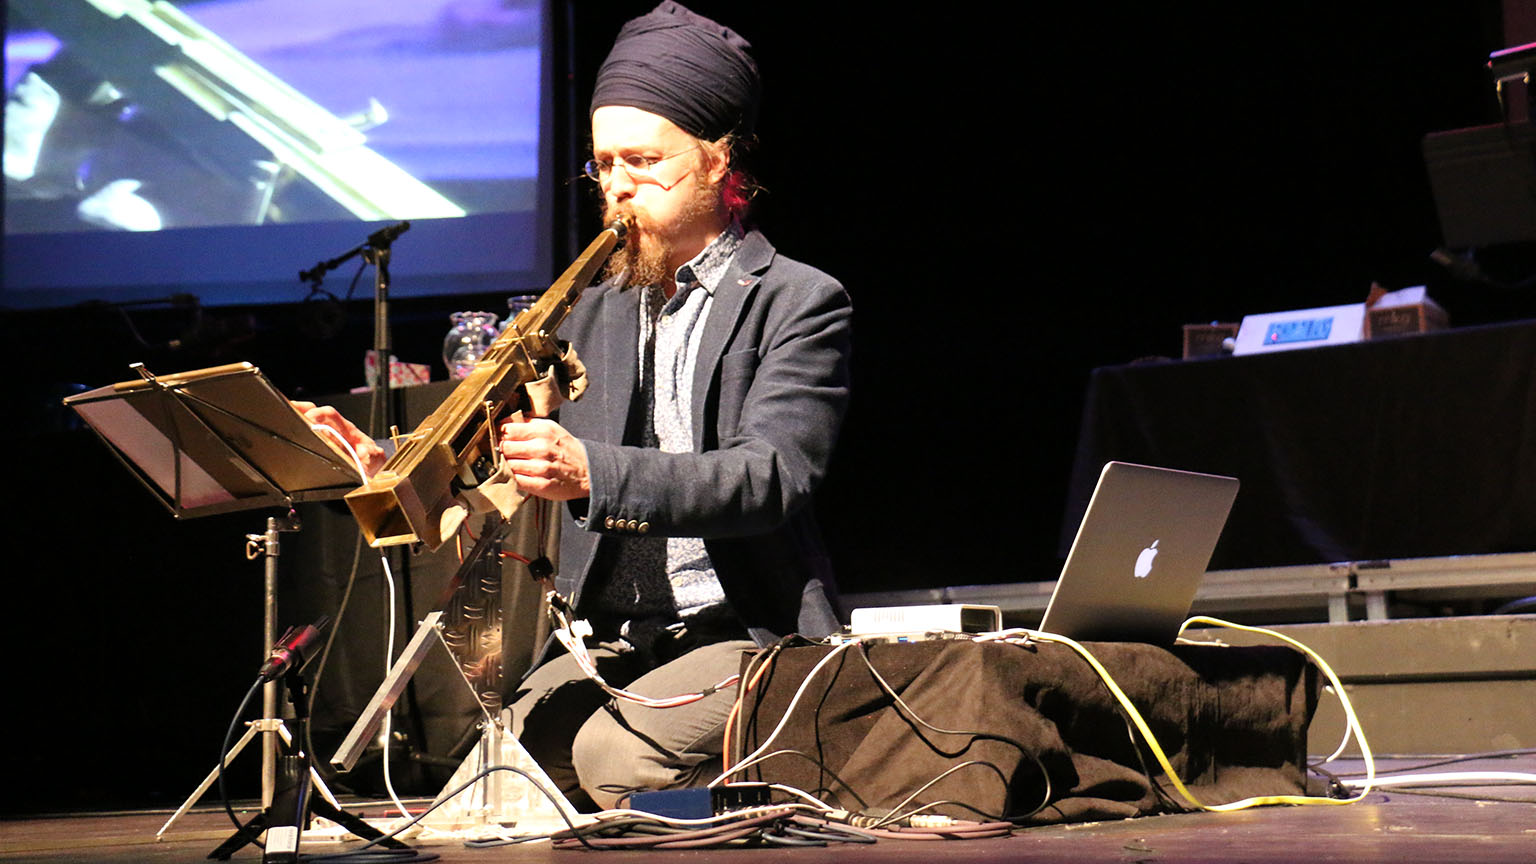 A man playing a custom made instrument sitting on stage.